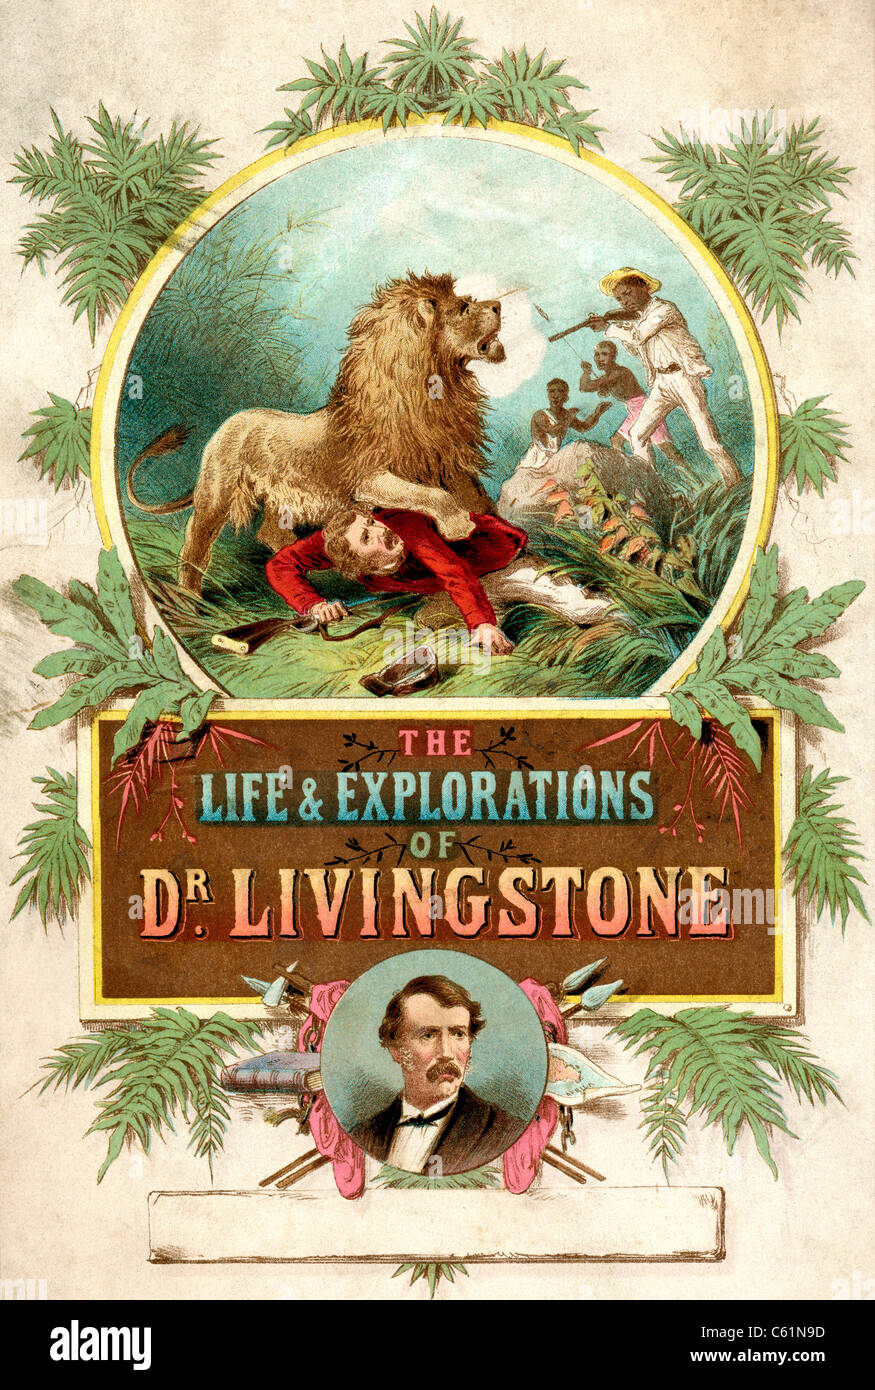 Frontispiece to The Life and Explorations of Dr. Livingstone published c.1875. Stock Photo